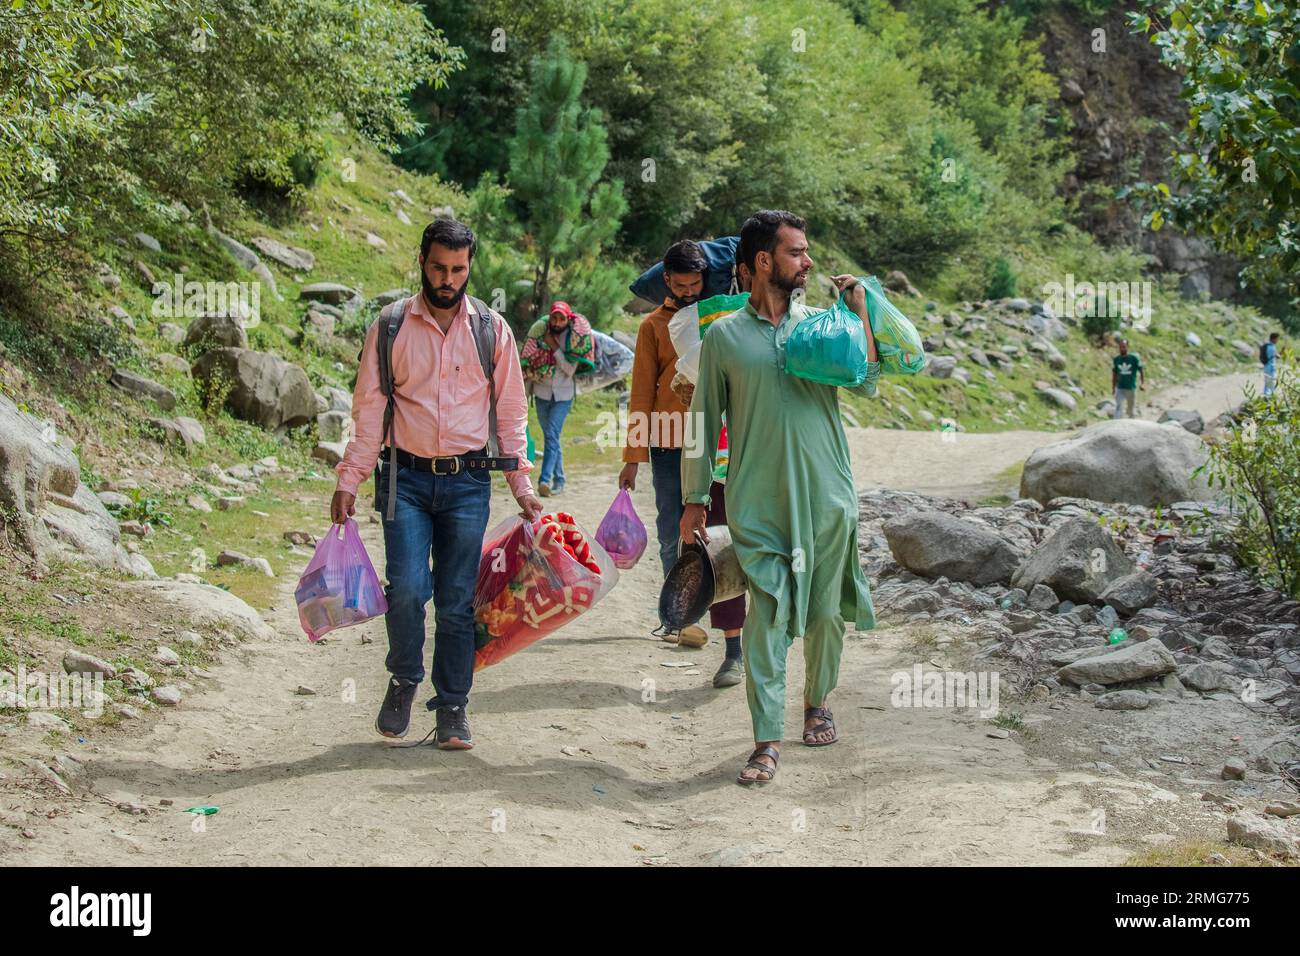 People in Indian Administered Kashmir walk along with food items and blankets as they prepare for camping on the banks of Neelam river or Kishan Ganga that has divided Kashmir into two parts controlled by nuclear rivals India and Pakistan. The river acts as a disputed line of control and flows through a village called Keran from both sides which is located on the northern side of Indian Kashmir's Border district Kupwara some 150kms from Srinagar and 93kms from Muzaffarabad, in the Pakistan side of Kashmir. (Photo by Faisal Bashir/SOPA Images/Sipa USA) Stock Photo